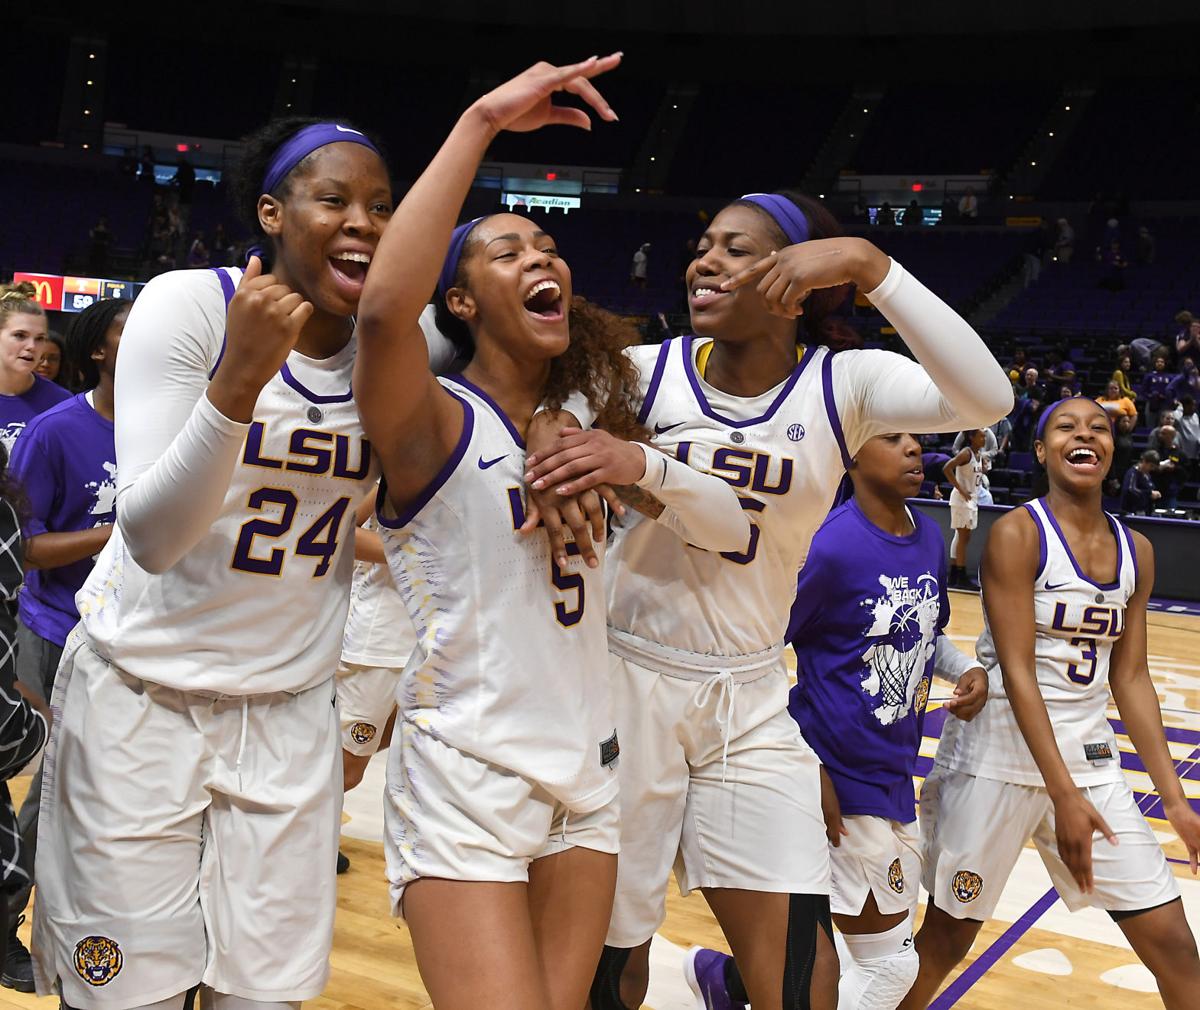 Lsu Womens Basketball Back In The Ap Top 25 For First Time Since 2014 Lsu 